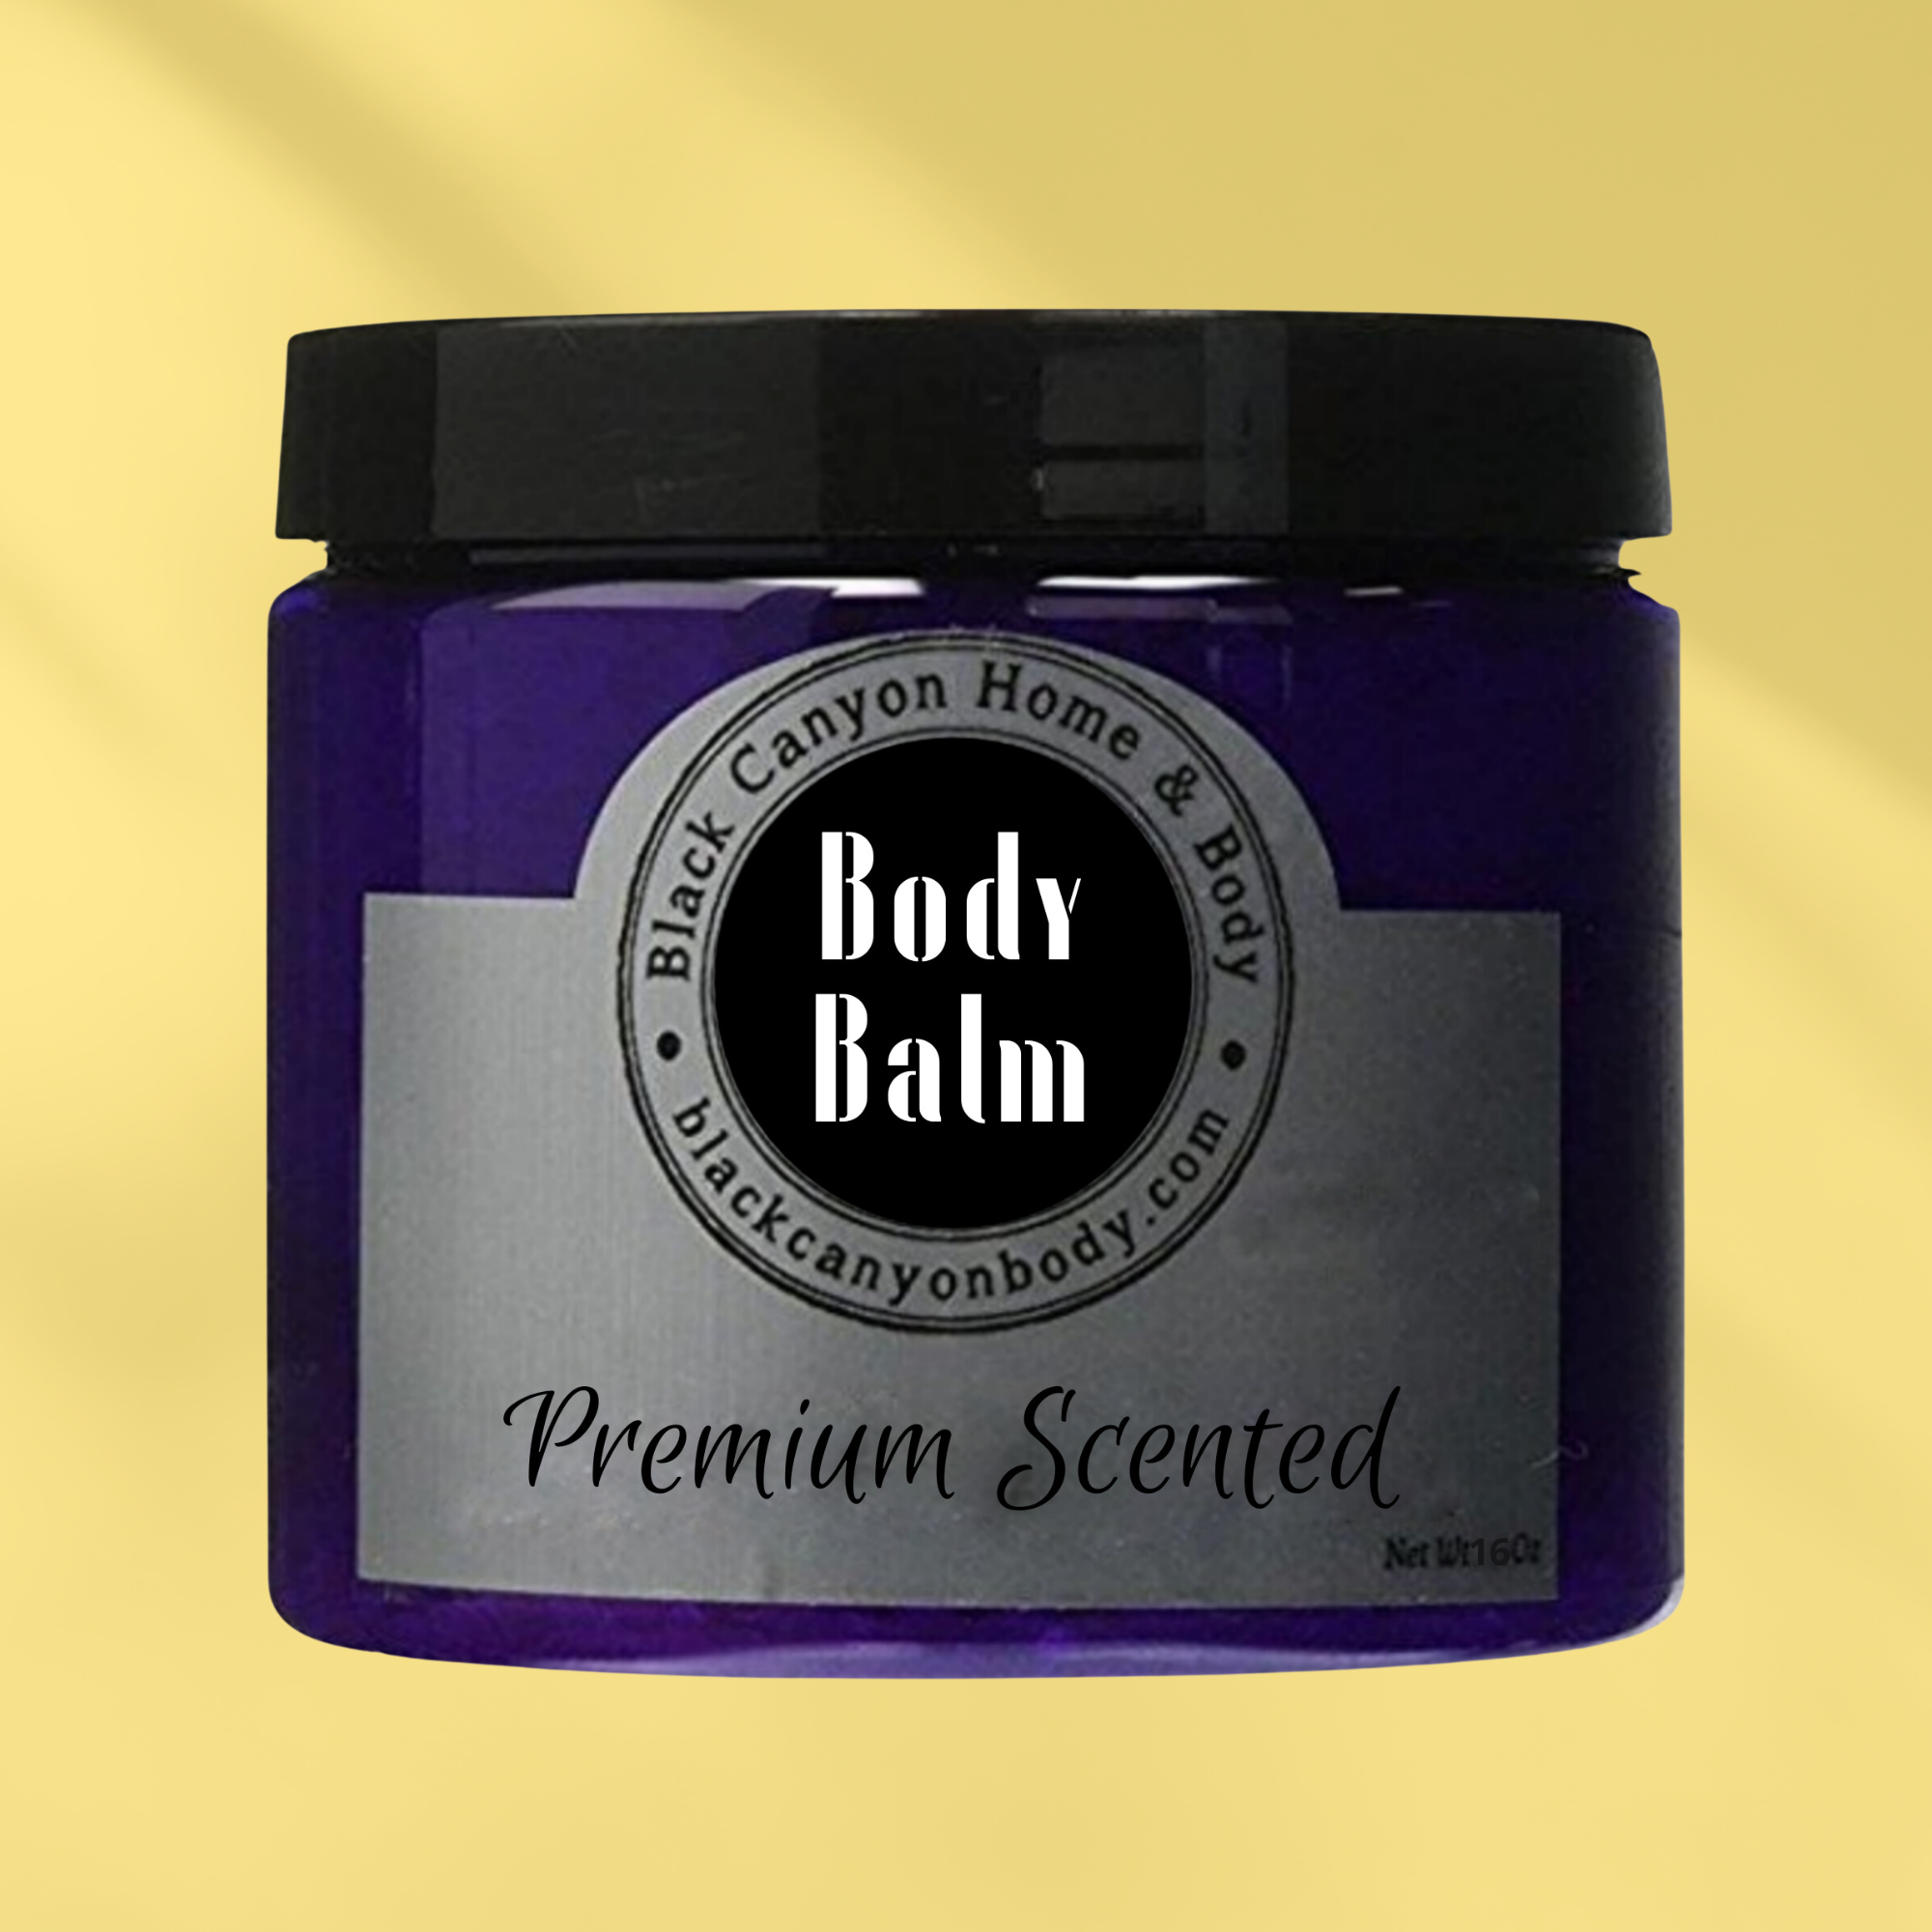 Black Canyon Bergamot & Spices Scented Natural Body Balm with Shea